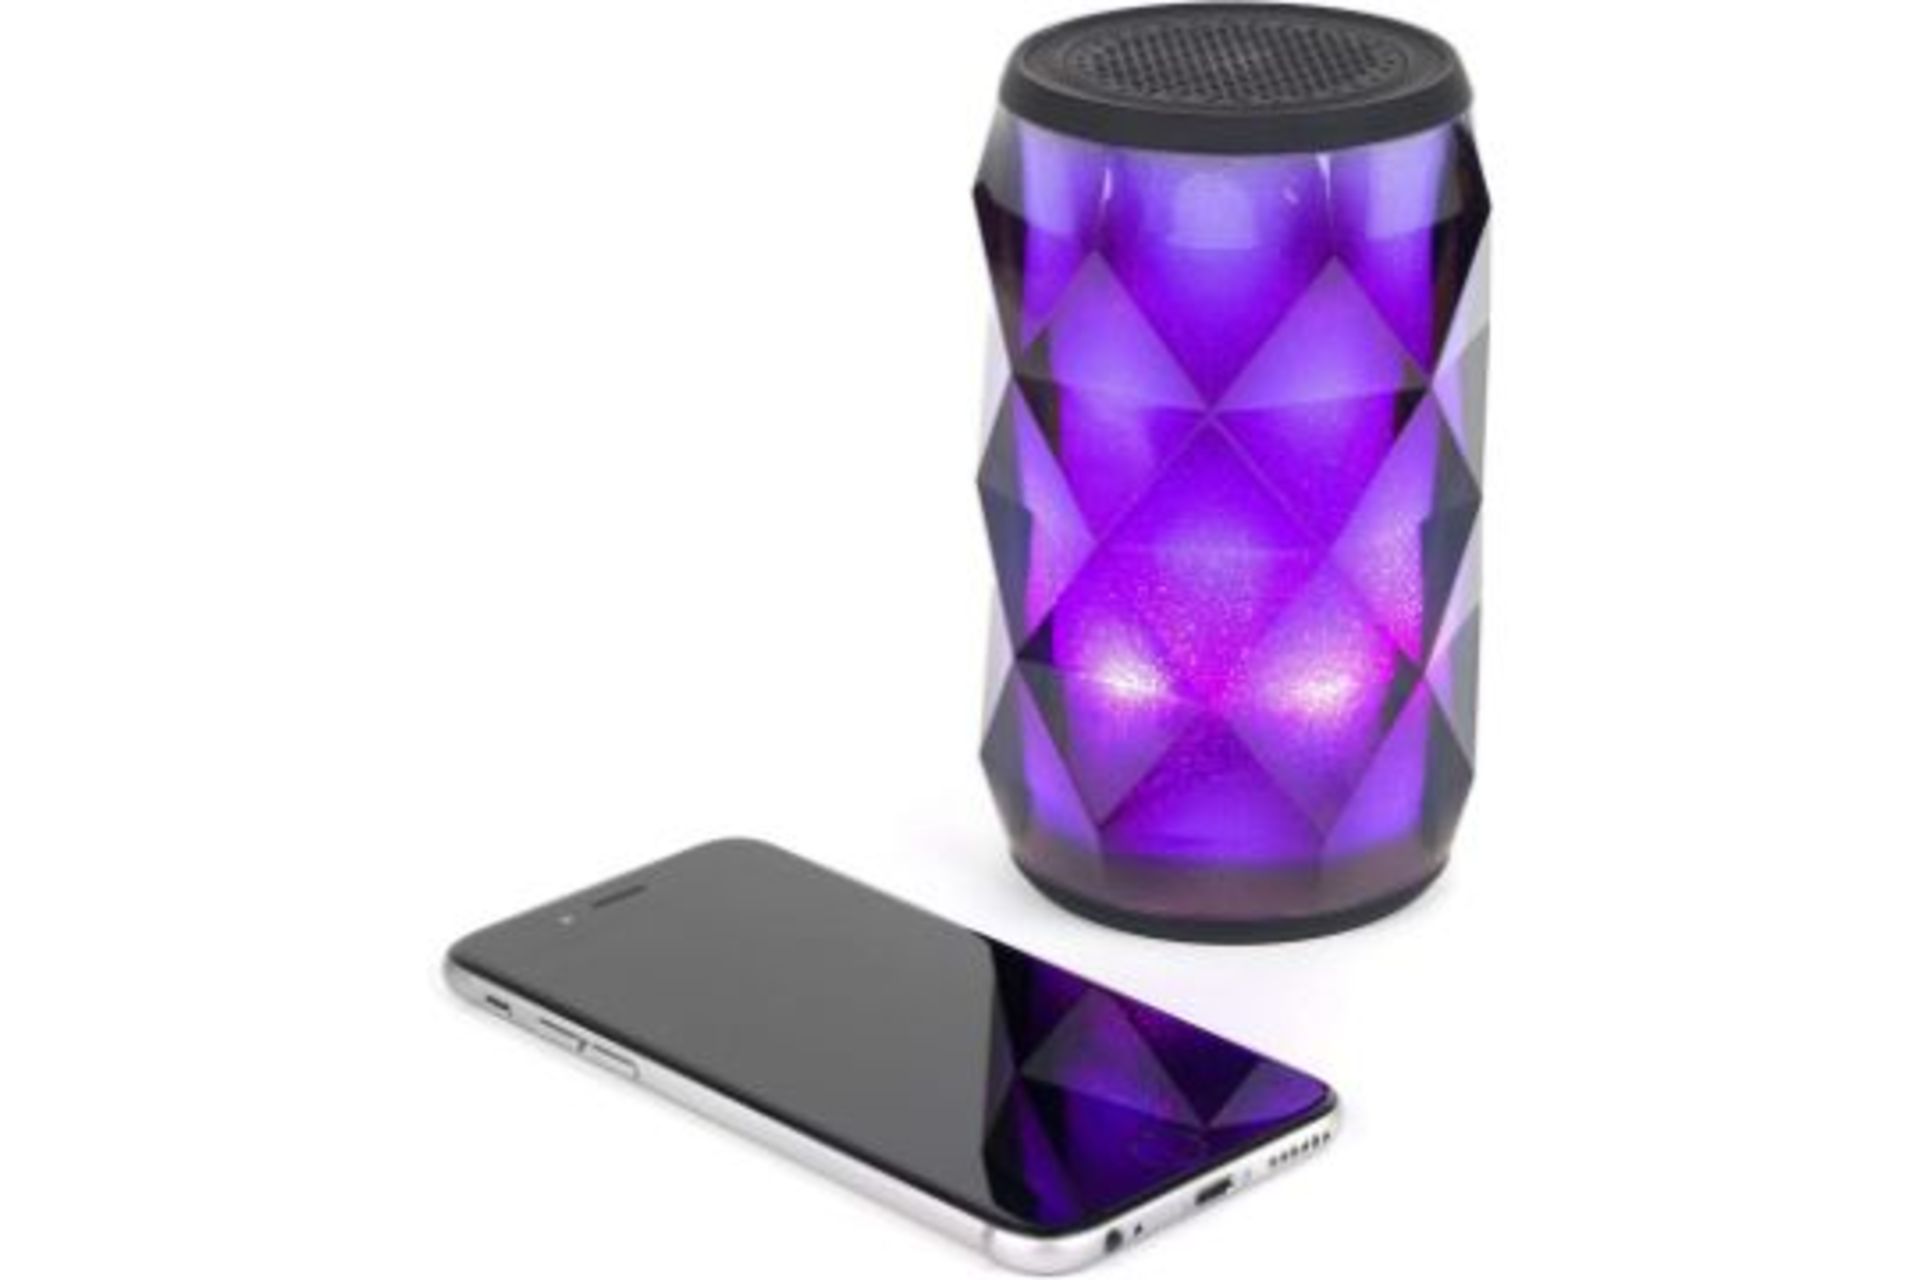 NEW PULSAR CRYSTAL CAN BLUETOOTH SPEAKER FOR IPHONE, ANDROID AND OTHER DEVICES